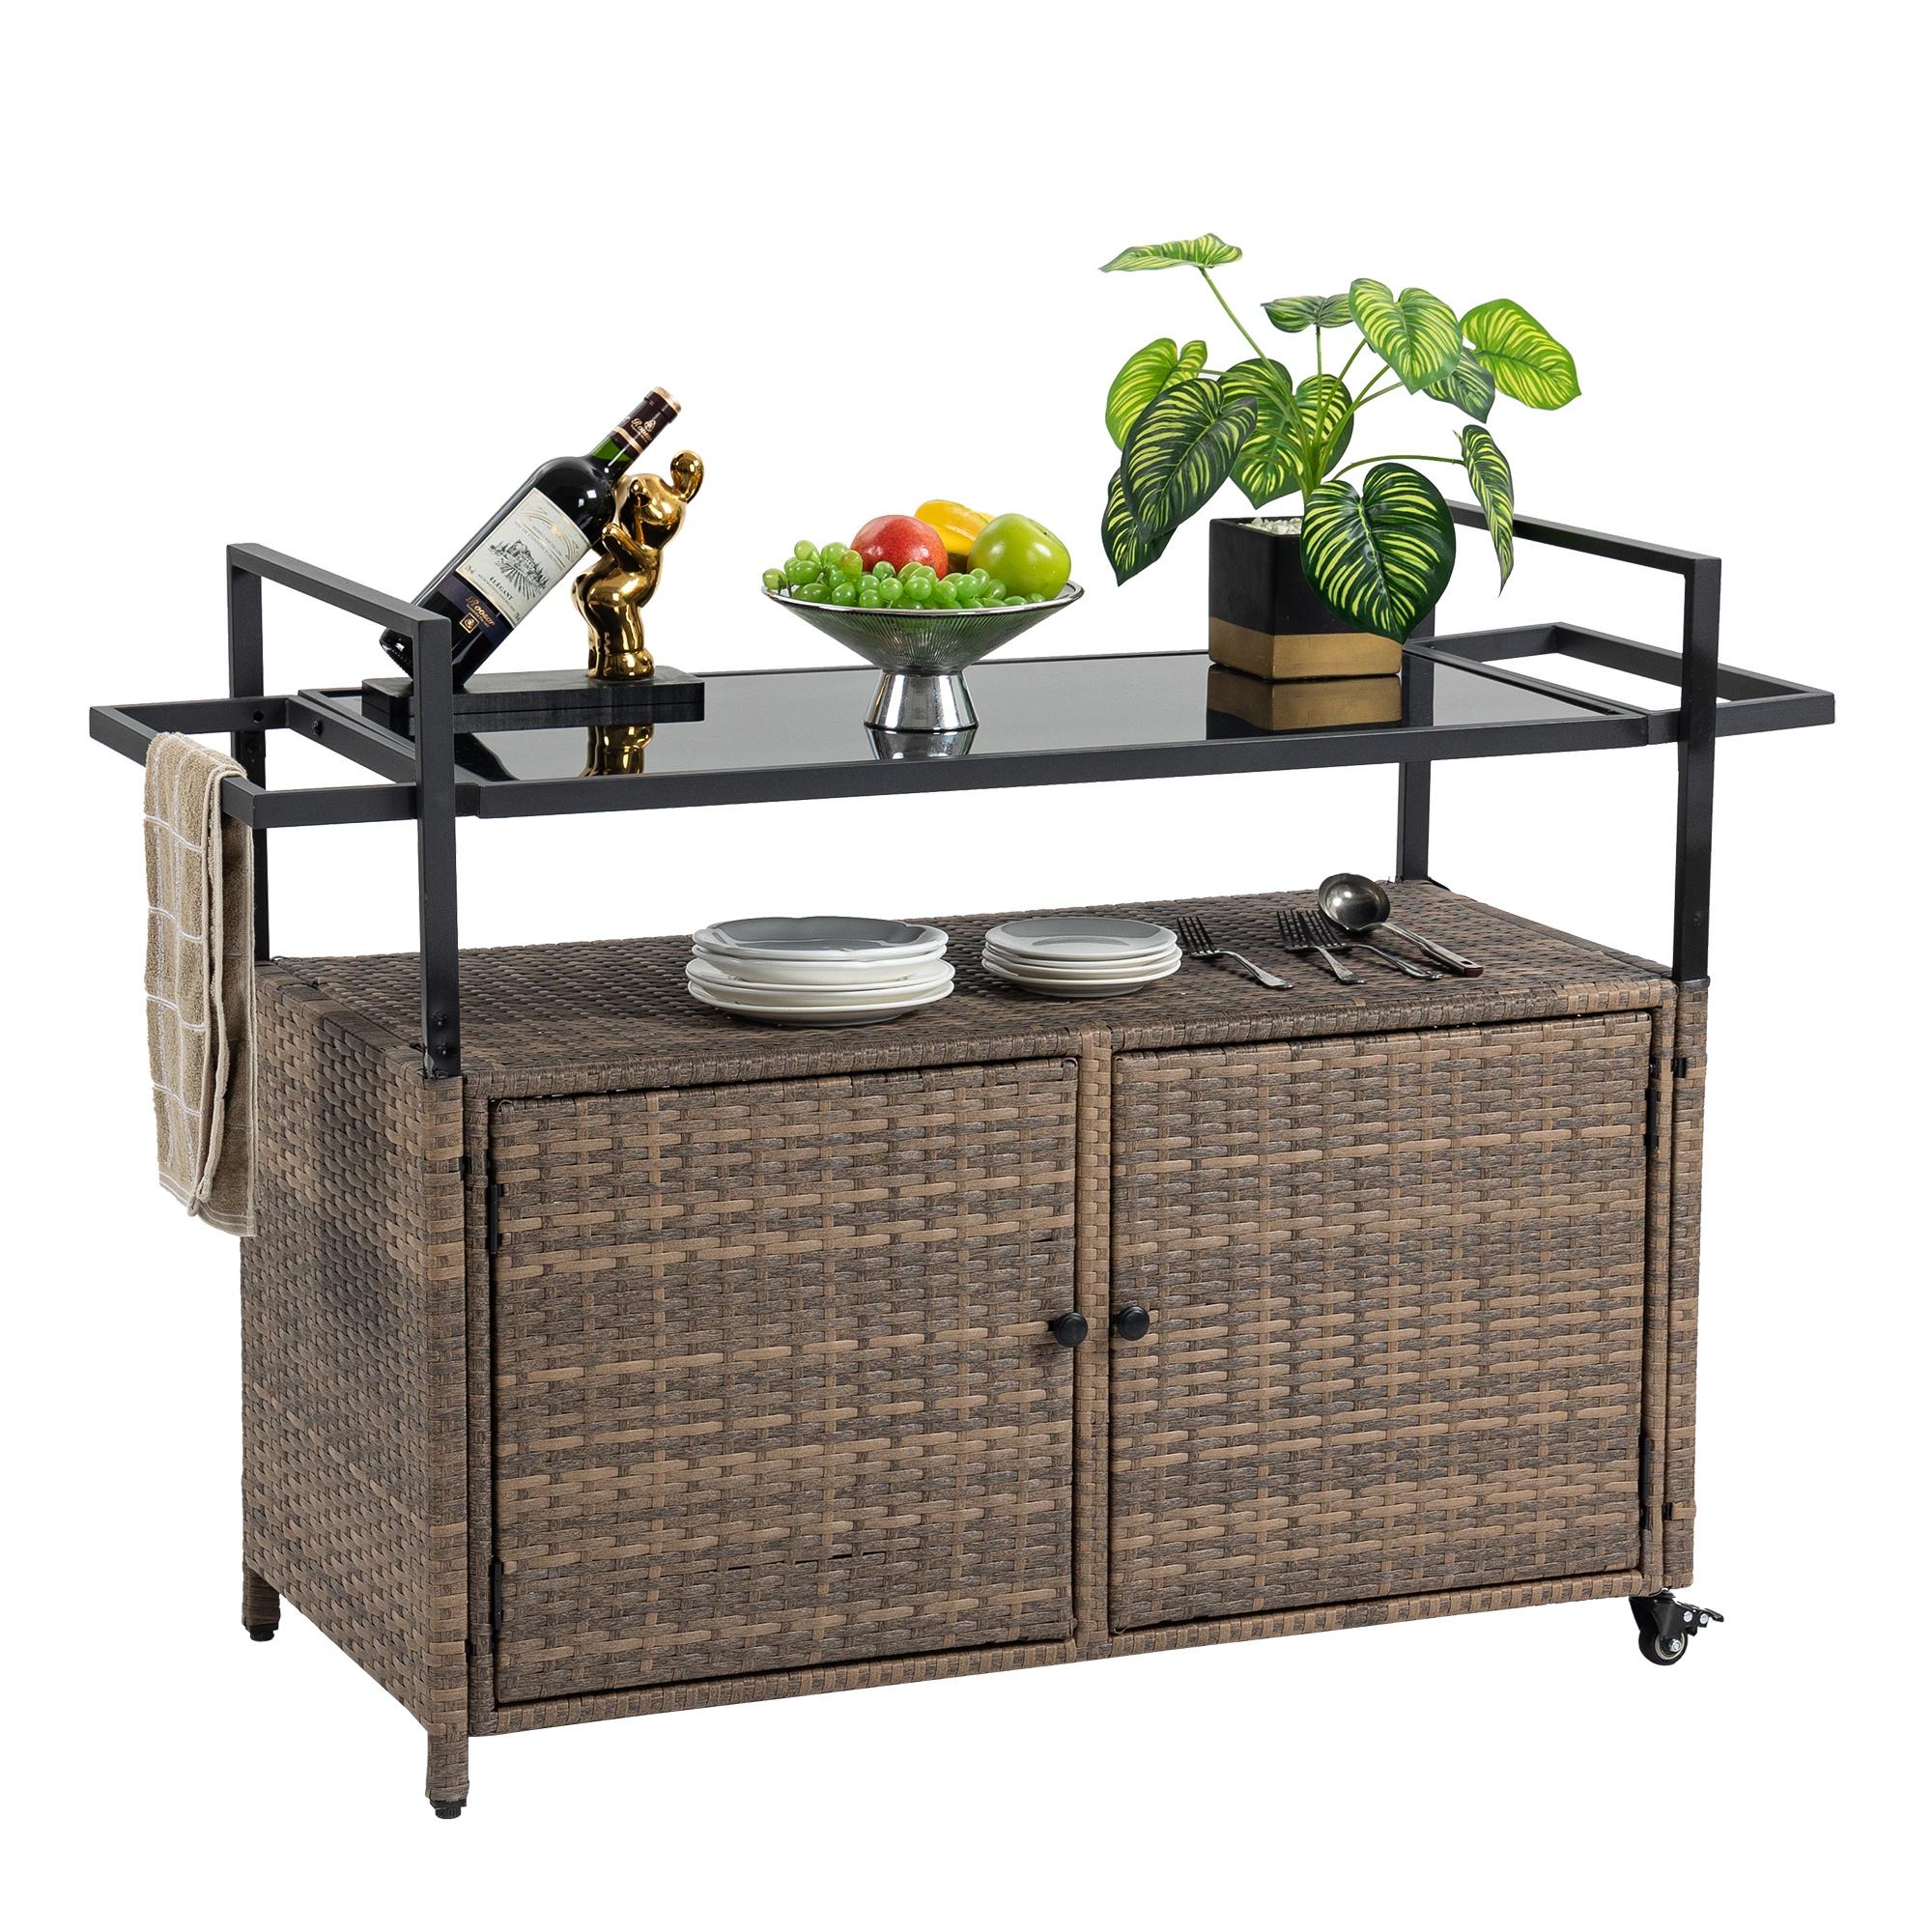 Syngar Patio Bar Cart on Wheels, Outdoor PE Wicker Bar Counter Table with Glass Top & Storage, Rolling Beverage Bar Counter Table, Wine Serving Cart for Garden, Porch, Backyard, Poolside, Light Brown - image 2 of 9